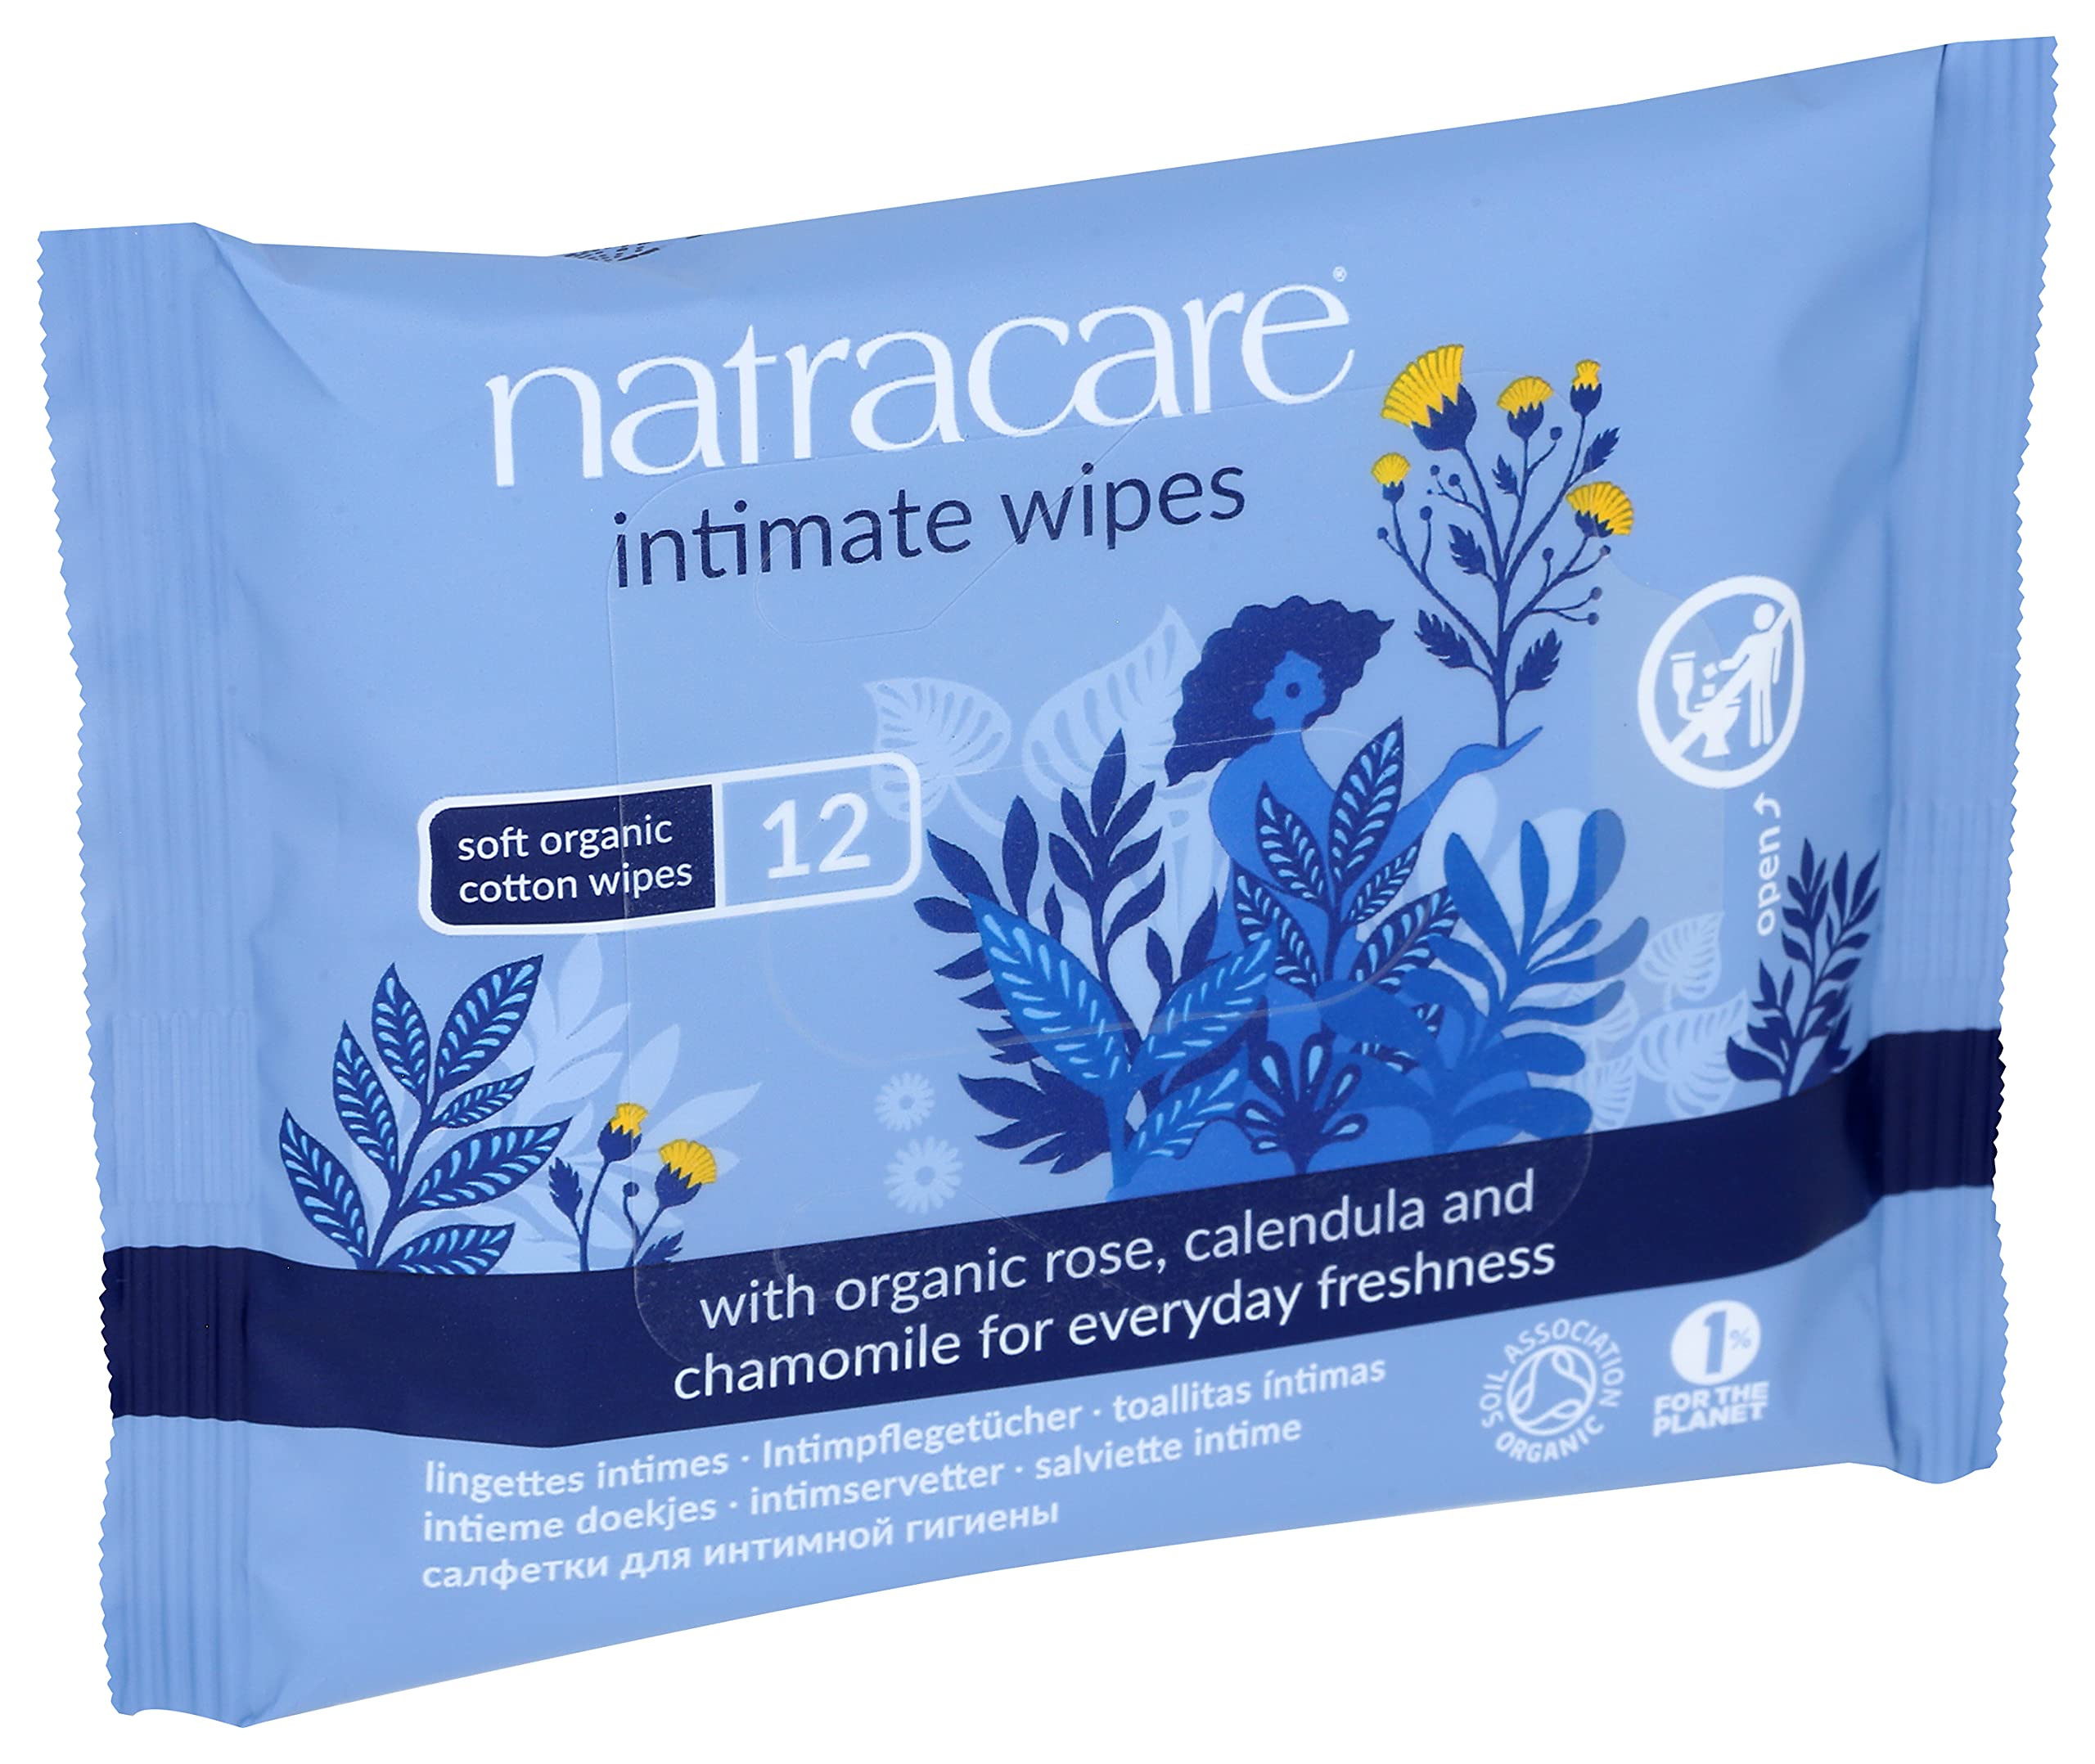 Natracare Organic Cotton Intimate Wipes Infused with Organic Essential Oils of Chamomile, Calendula and French Rose, 12 Wipes per pack (24 Pack, 288 wipes total)